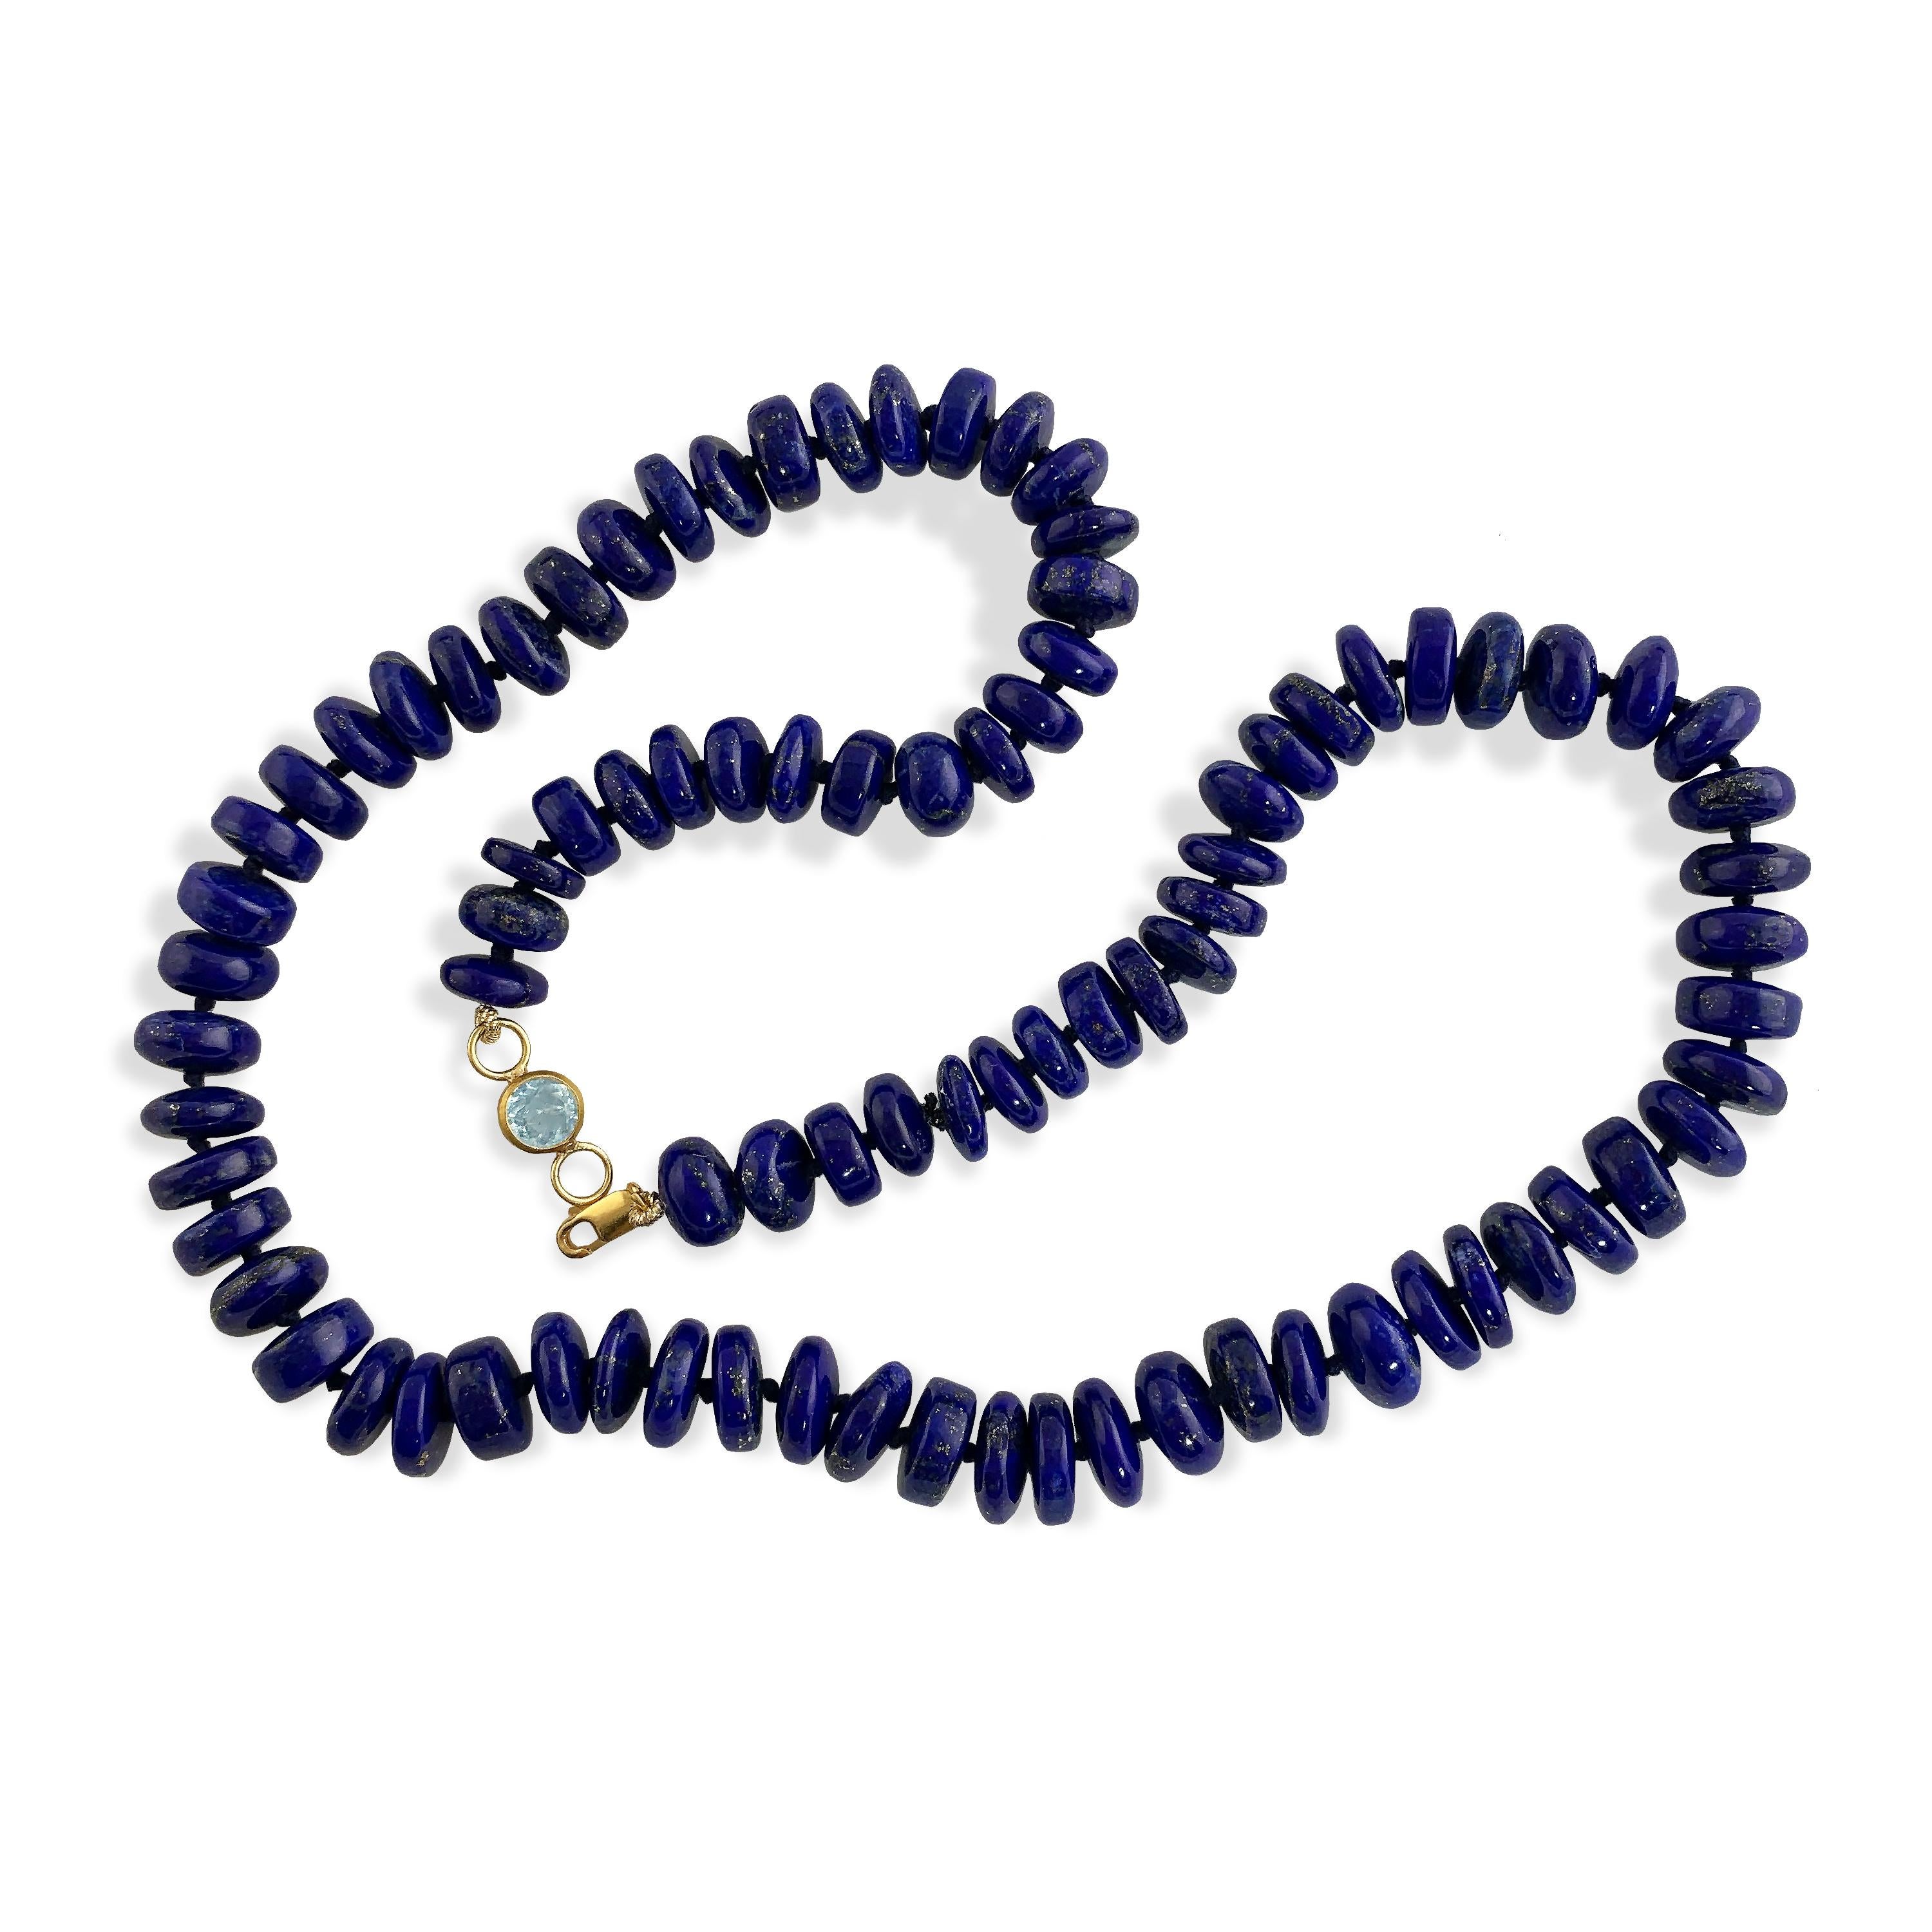 This Ico & the Bird Fine Jewelry  one-of-a-kind, dark lapis lazuli beaded necklace is perfect for layering with longer chains and displaying your most prized charm.
Handcrafted in 22-karat yellow gold with a faceted Aquamarine gemstone and lobster